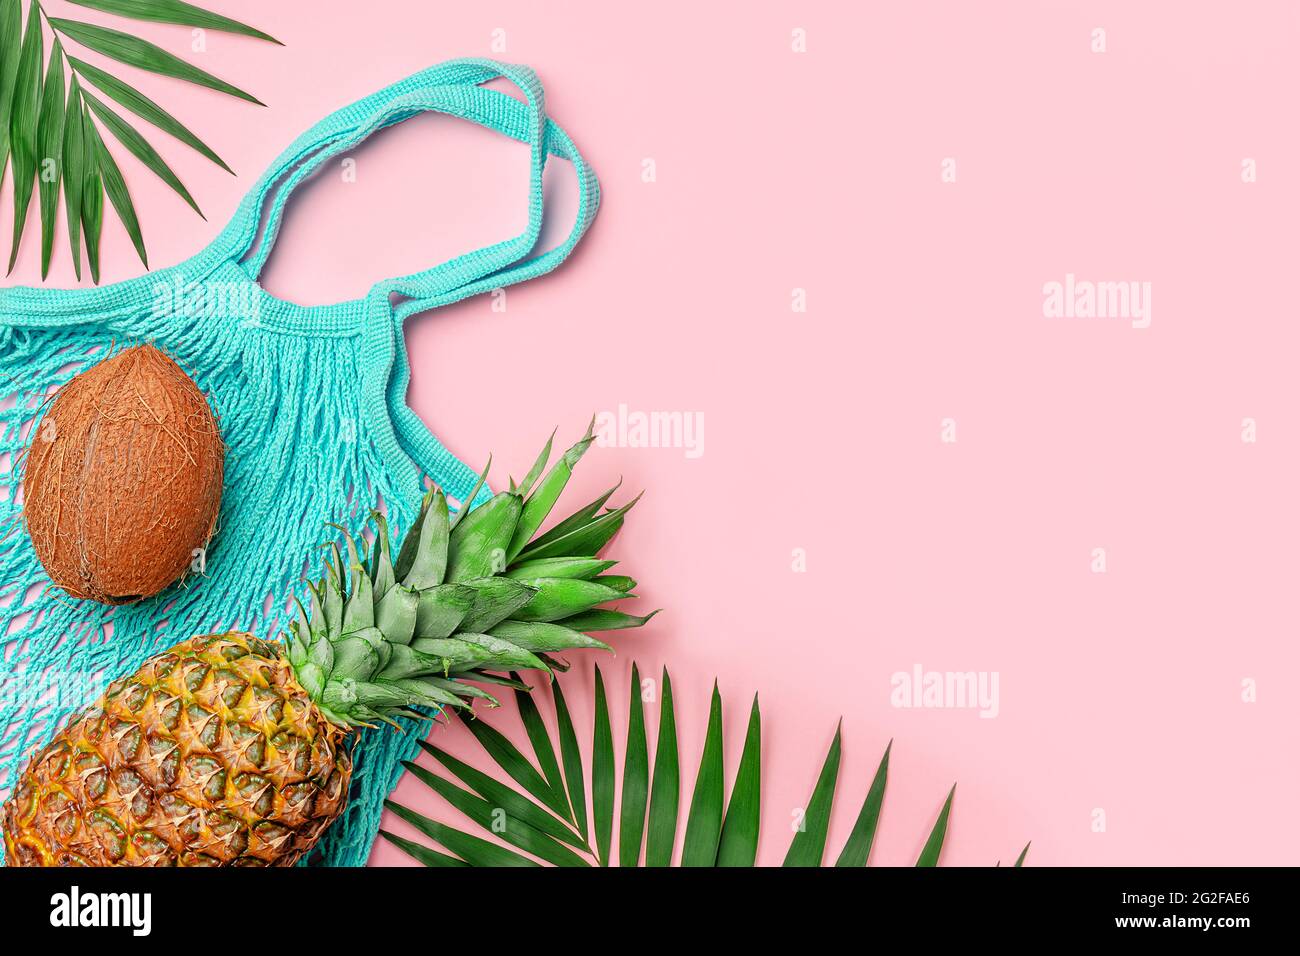 Summer pink background with pineapple, coconut and reusable net bag on pink backdrop. Stock Photo